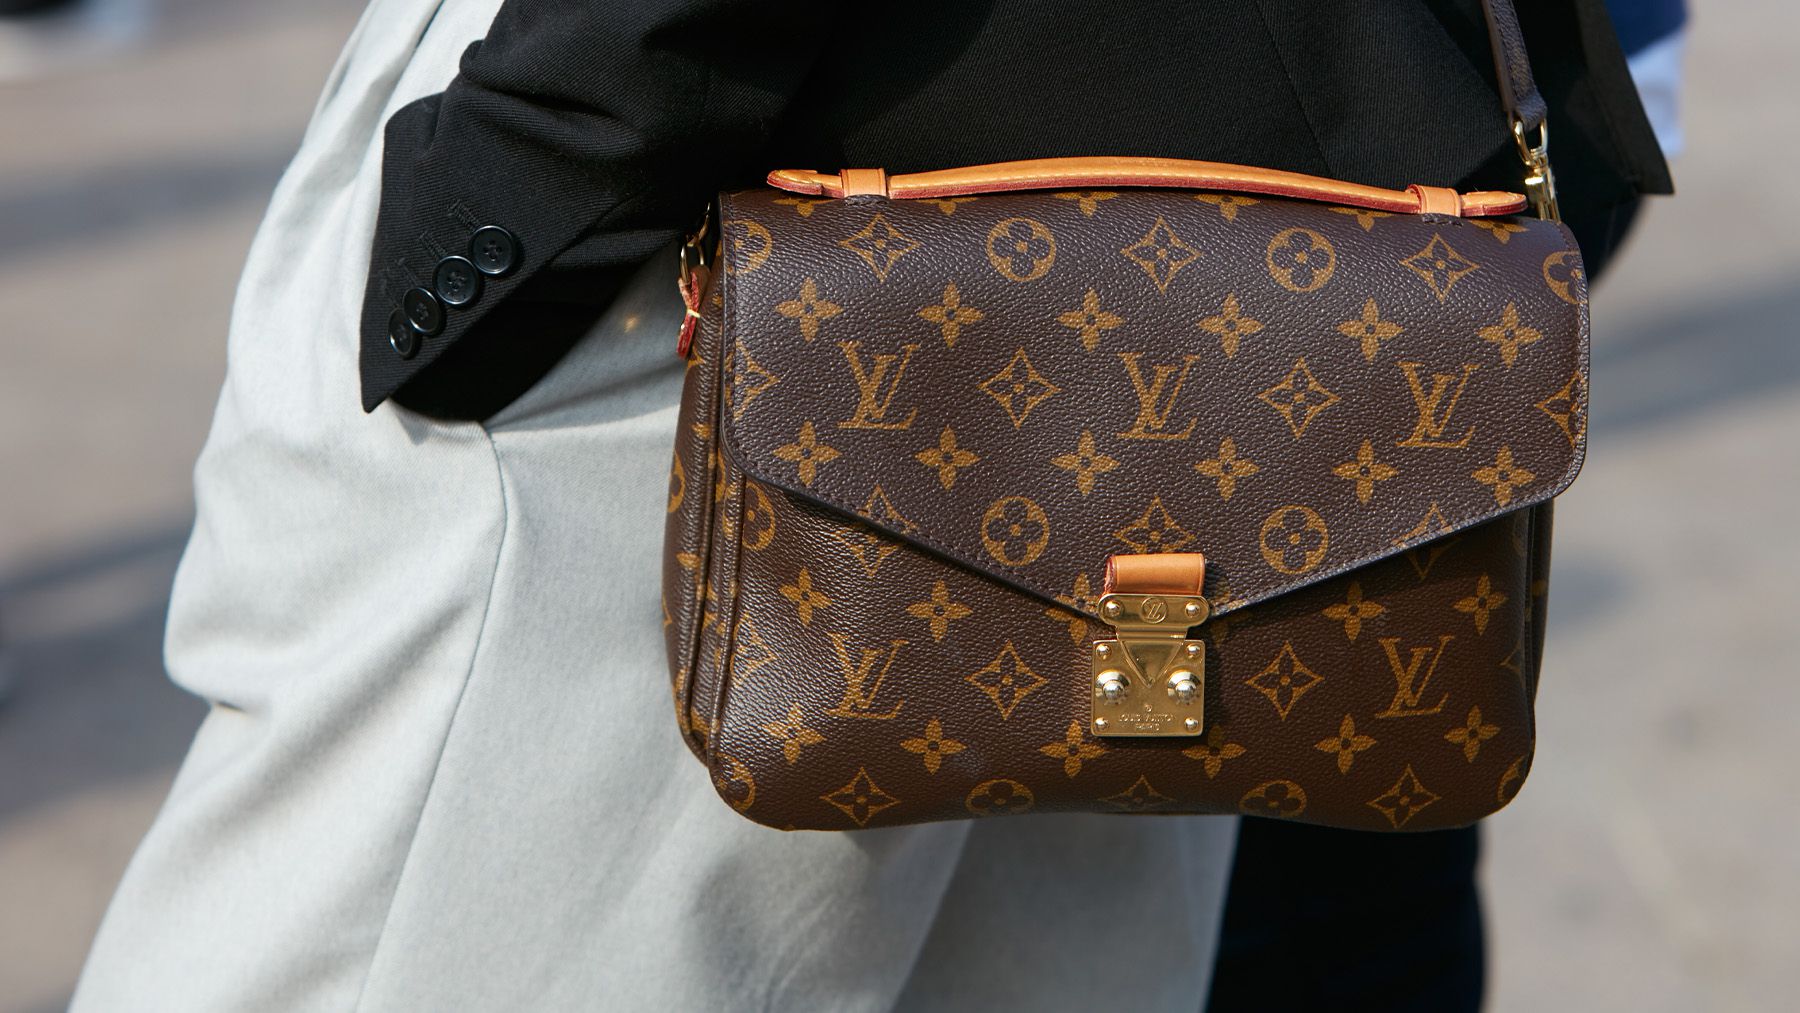 LVMH Sales Lifted by Strong Chinese Rebound in First Quarter